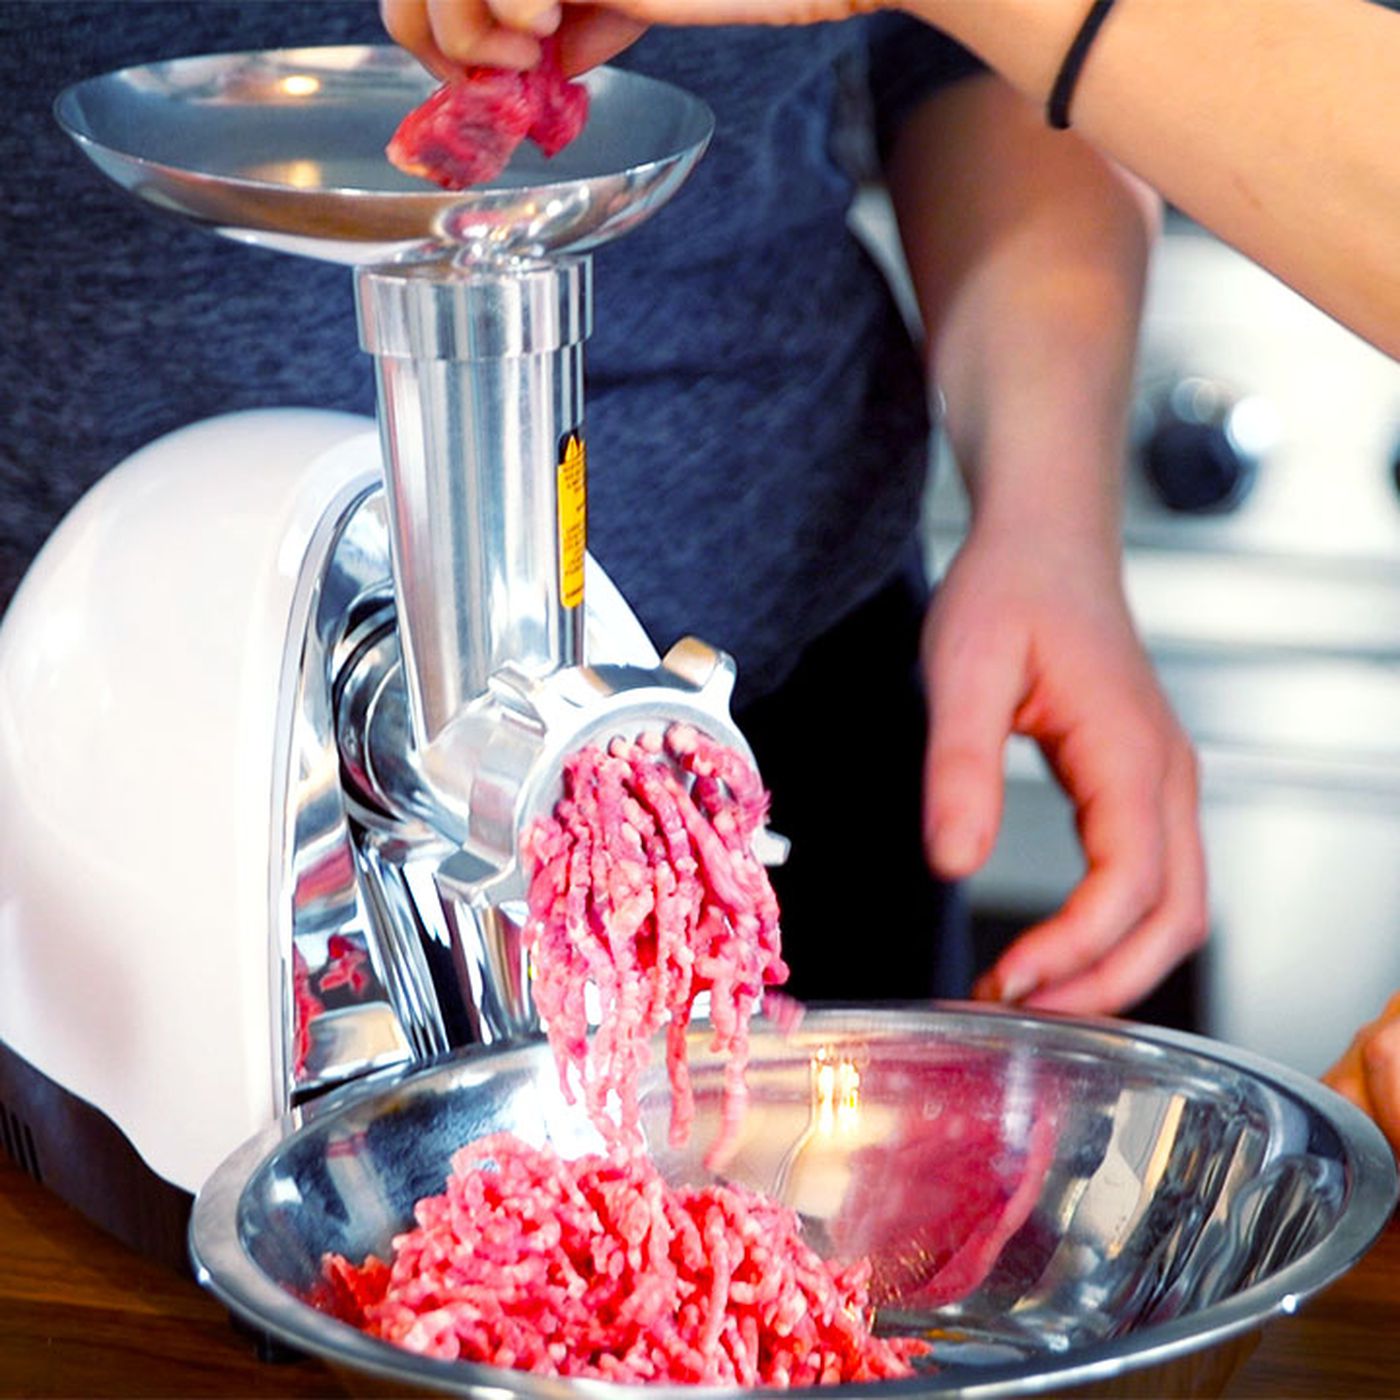 Which Meat Grinder Is Best for Your Home? - Eater